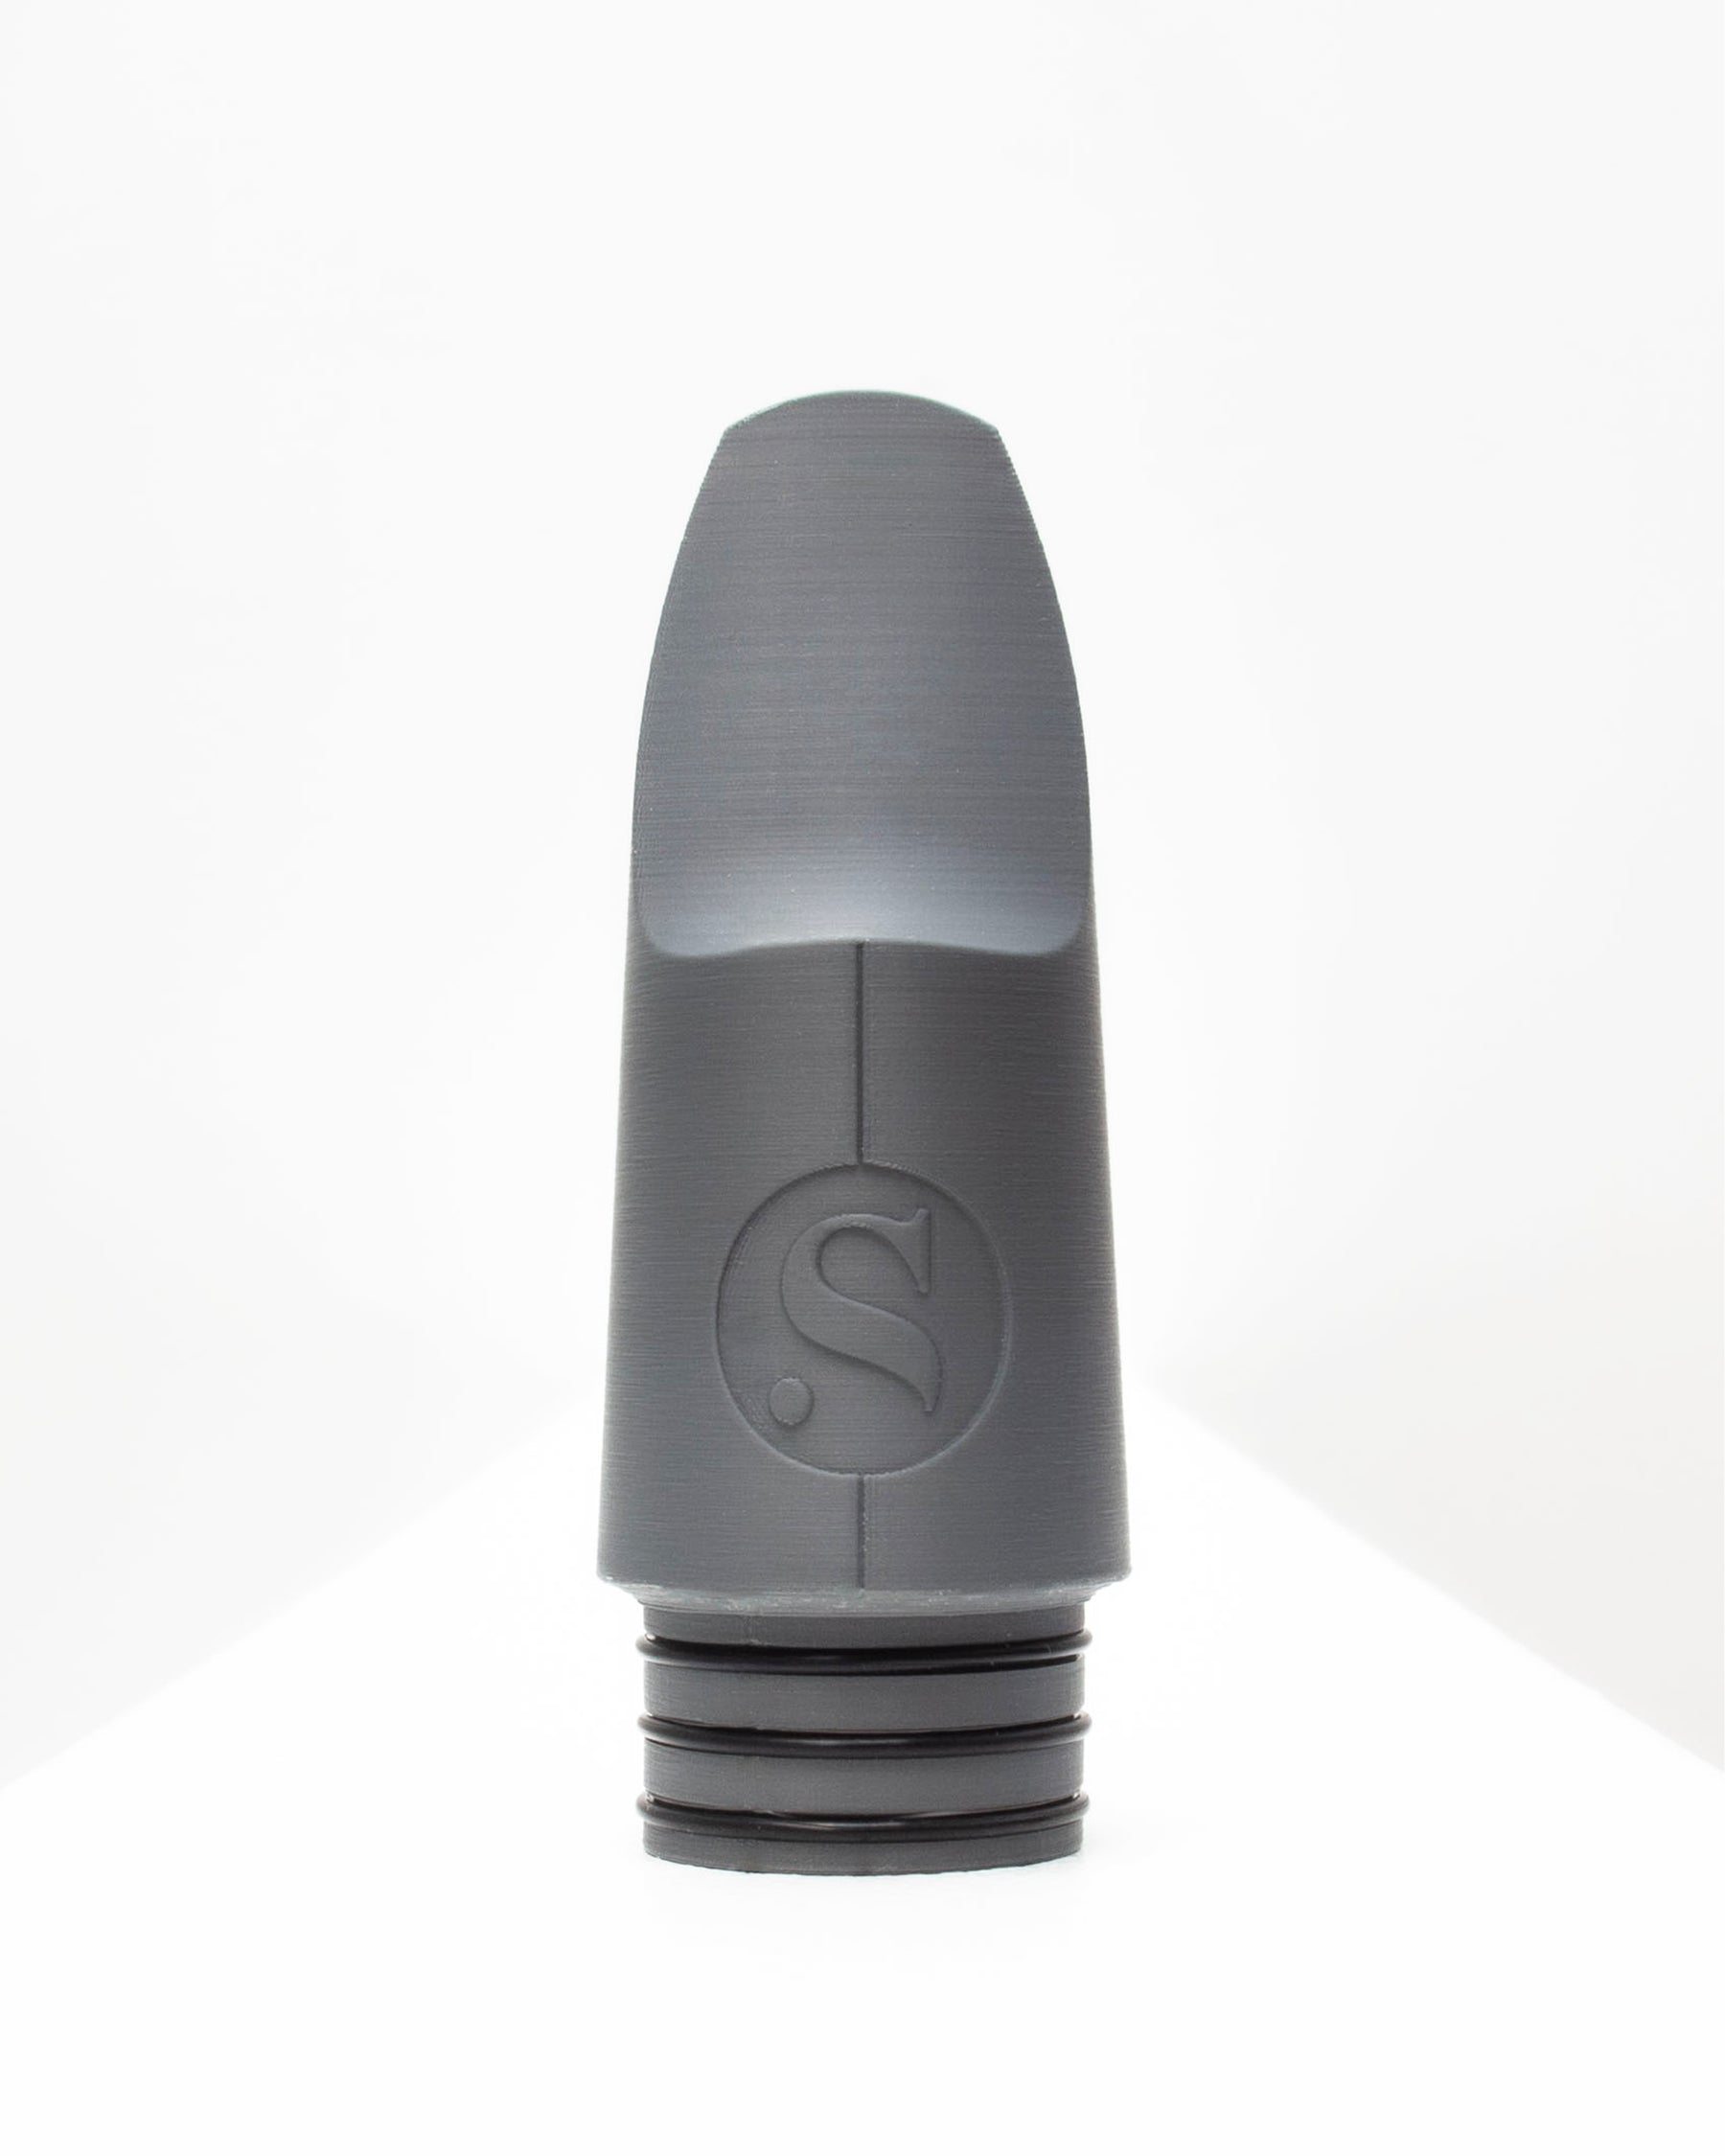 Bass Originals Clarinet mouthpiece - Smoky by Syos - 6 / Anthracite Metal